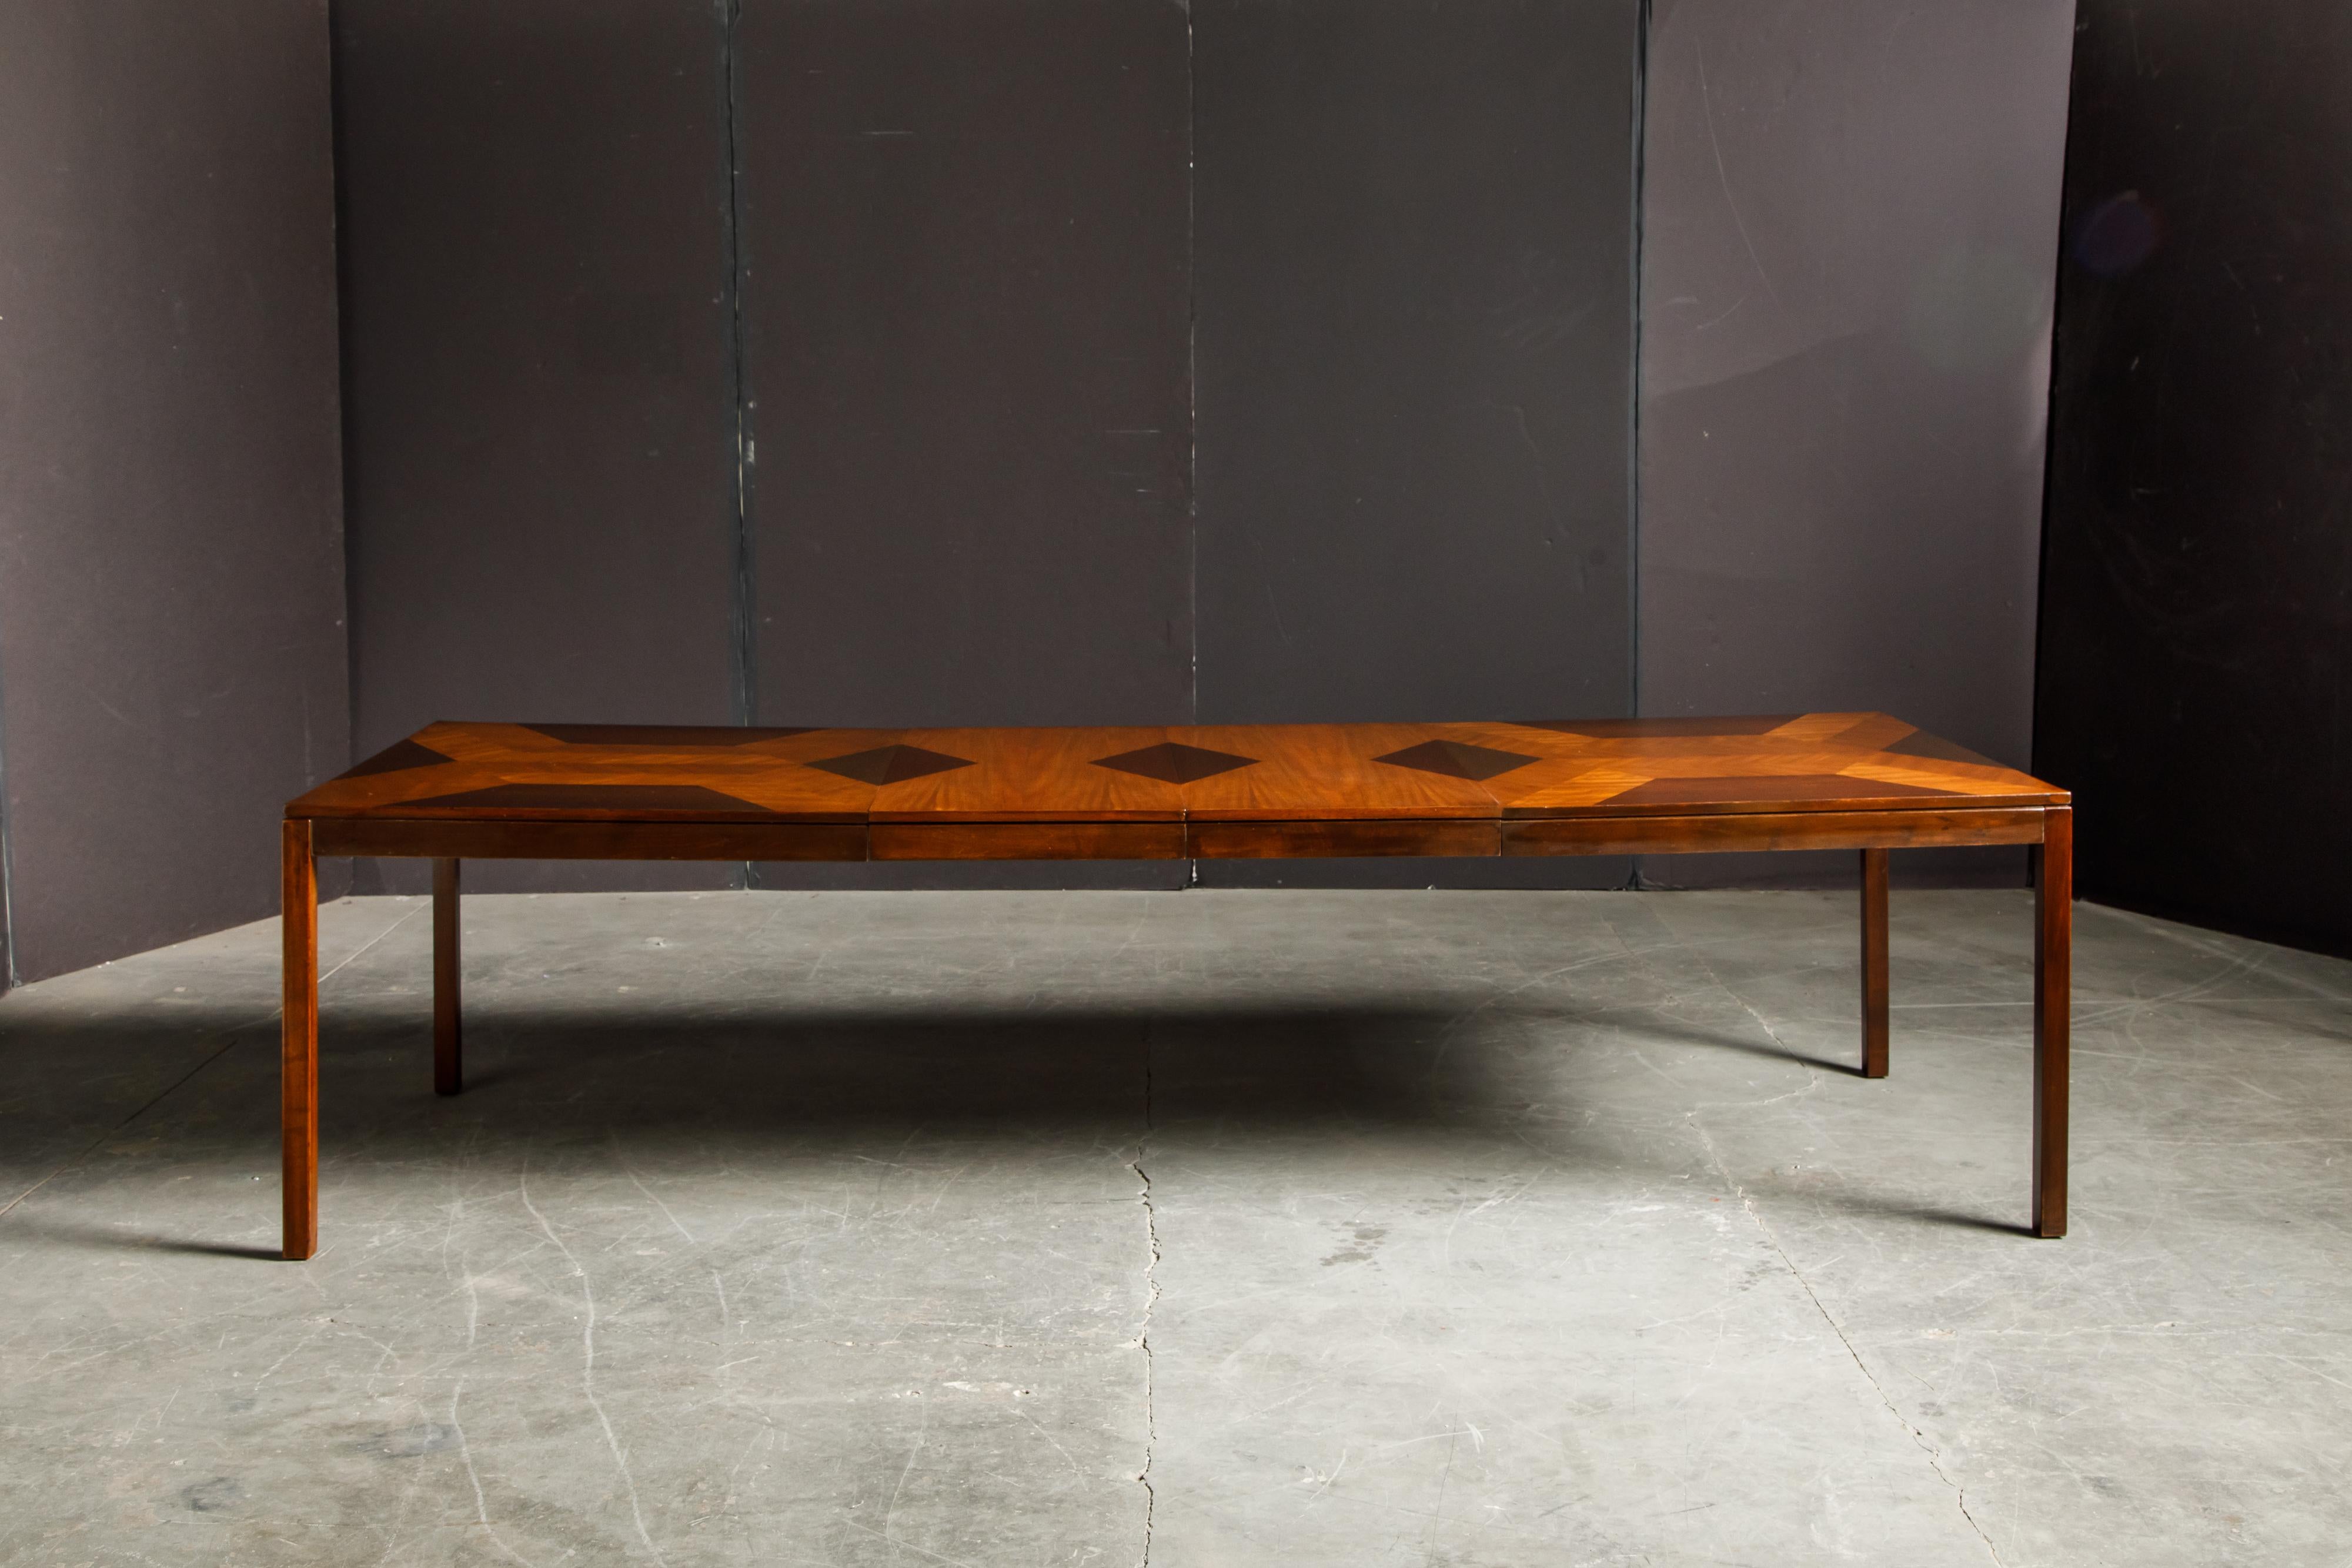 This beautifully refinished 1970's Parsons dining table by Milo Baughman for Directional features strips of highly grained exotic woods in various finishes and patterns creating contrasting lines and shaped for a spectacular effect. 

In excellent